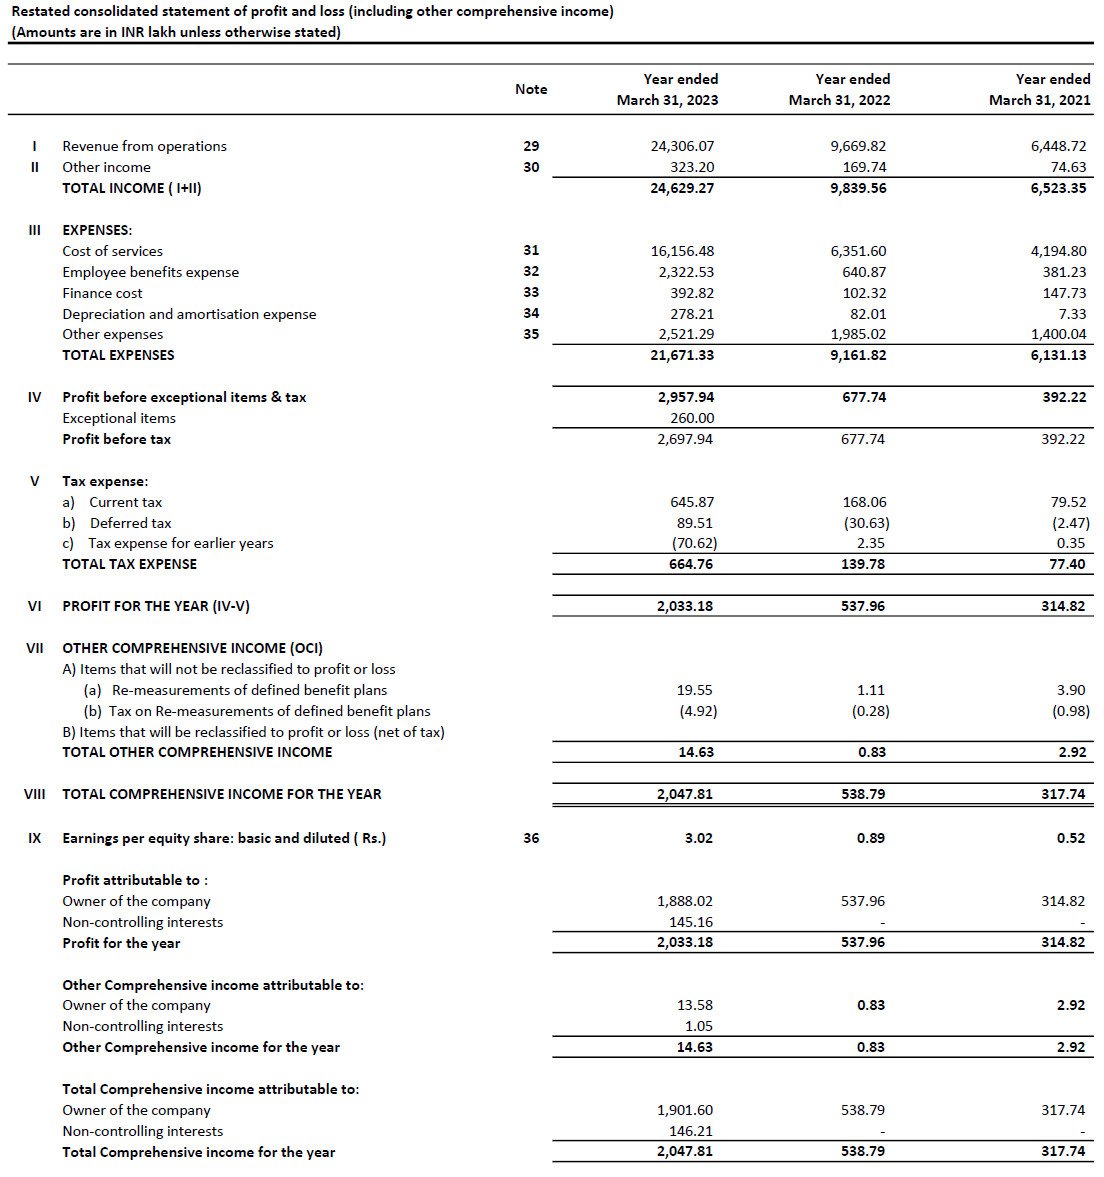 BLS E-Services IPO Statement of Profit and Loss